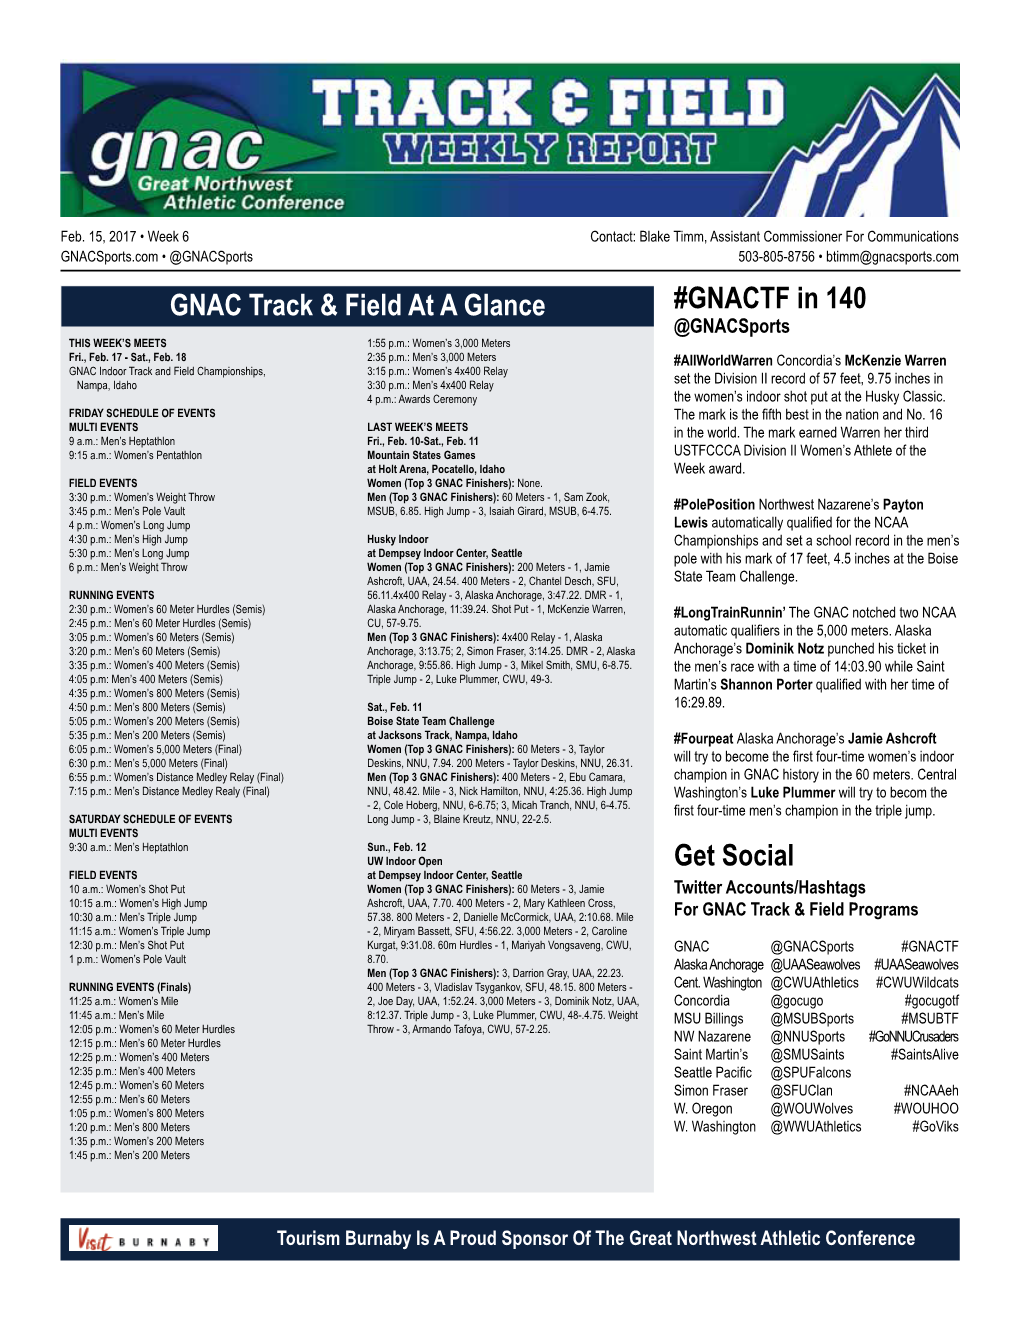 GNAC Track & Field at a Glance Get Social #GNACTF In